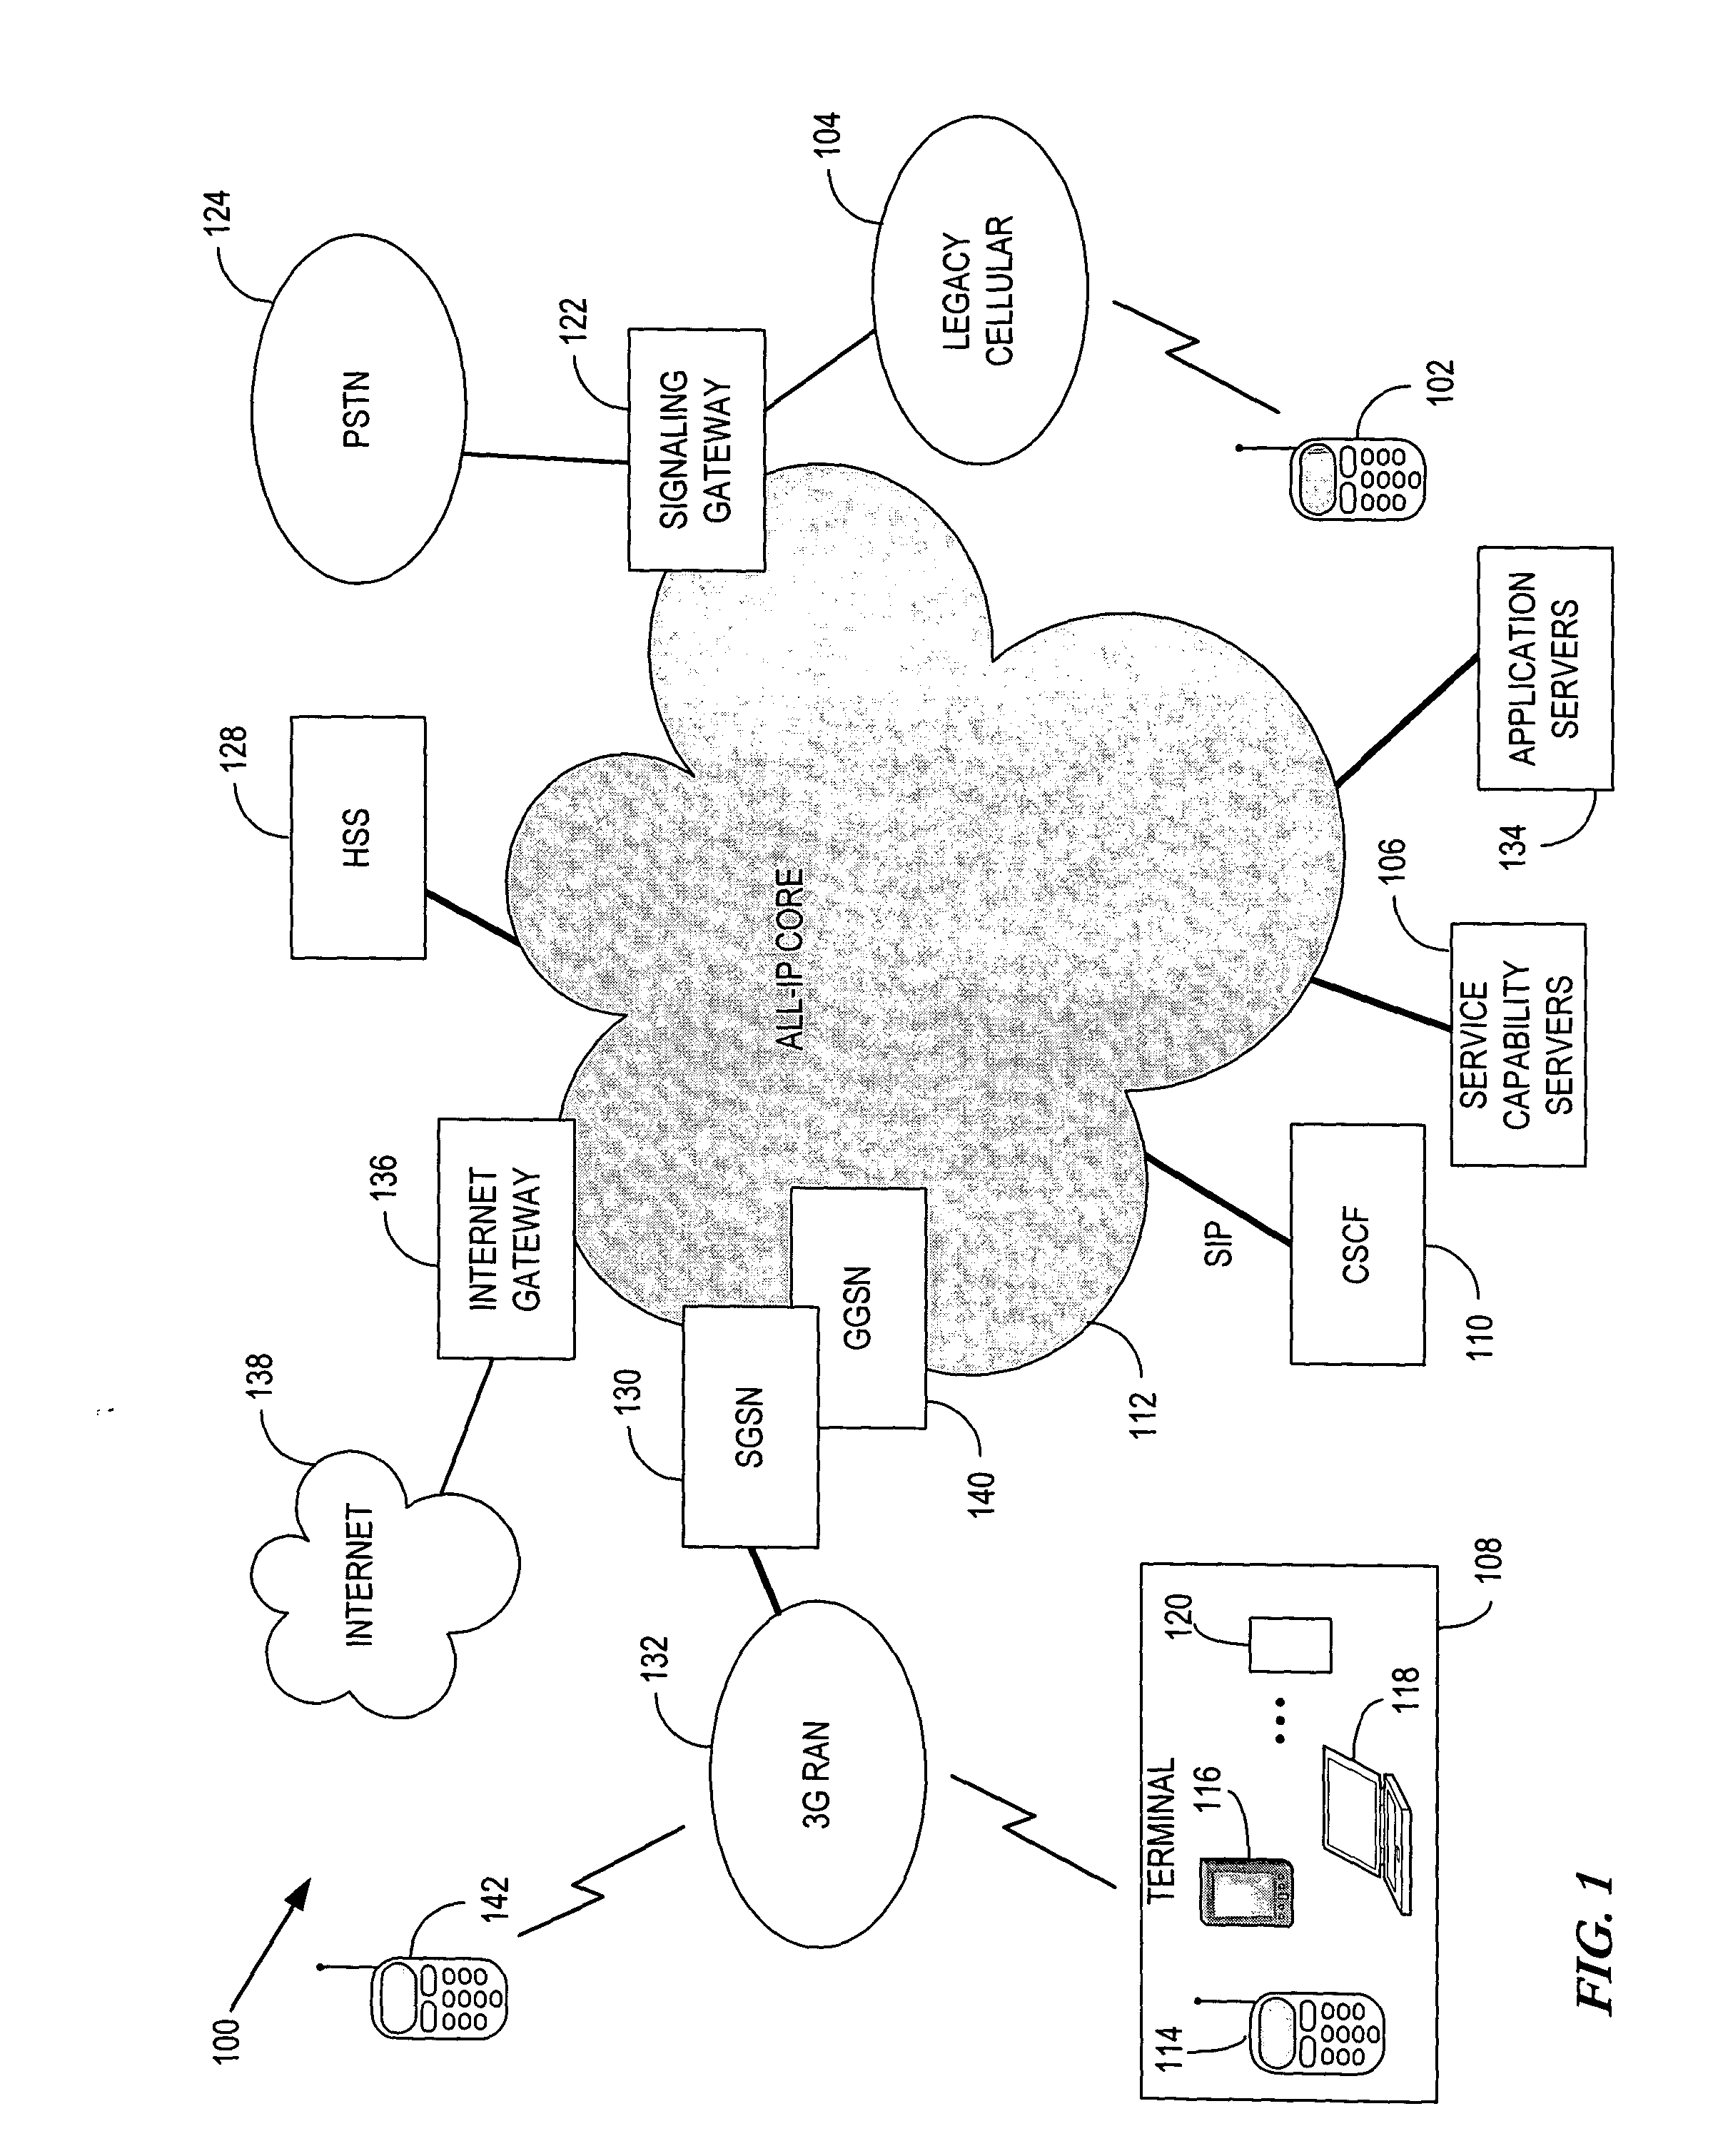 System and method for adaptation of peer-to-peer multimedia sessions